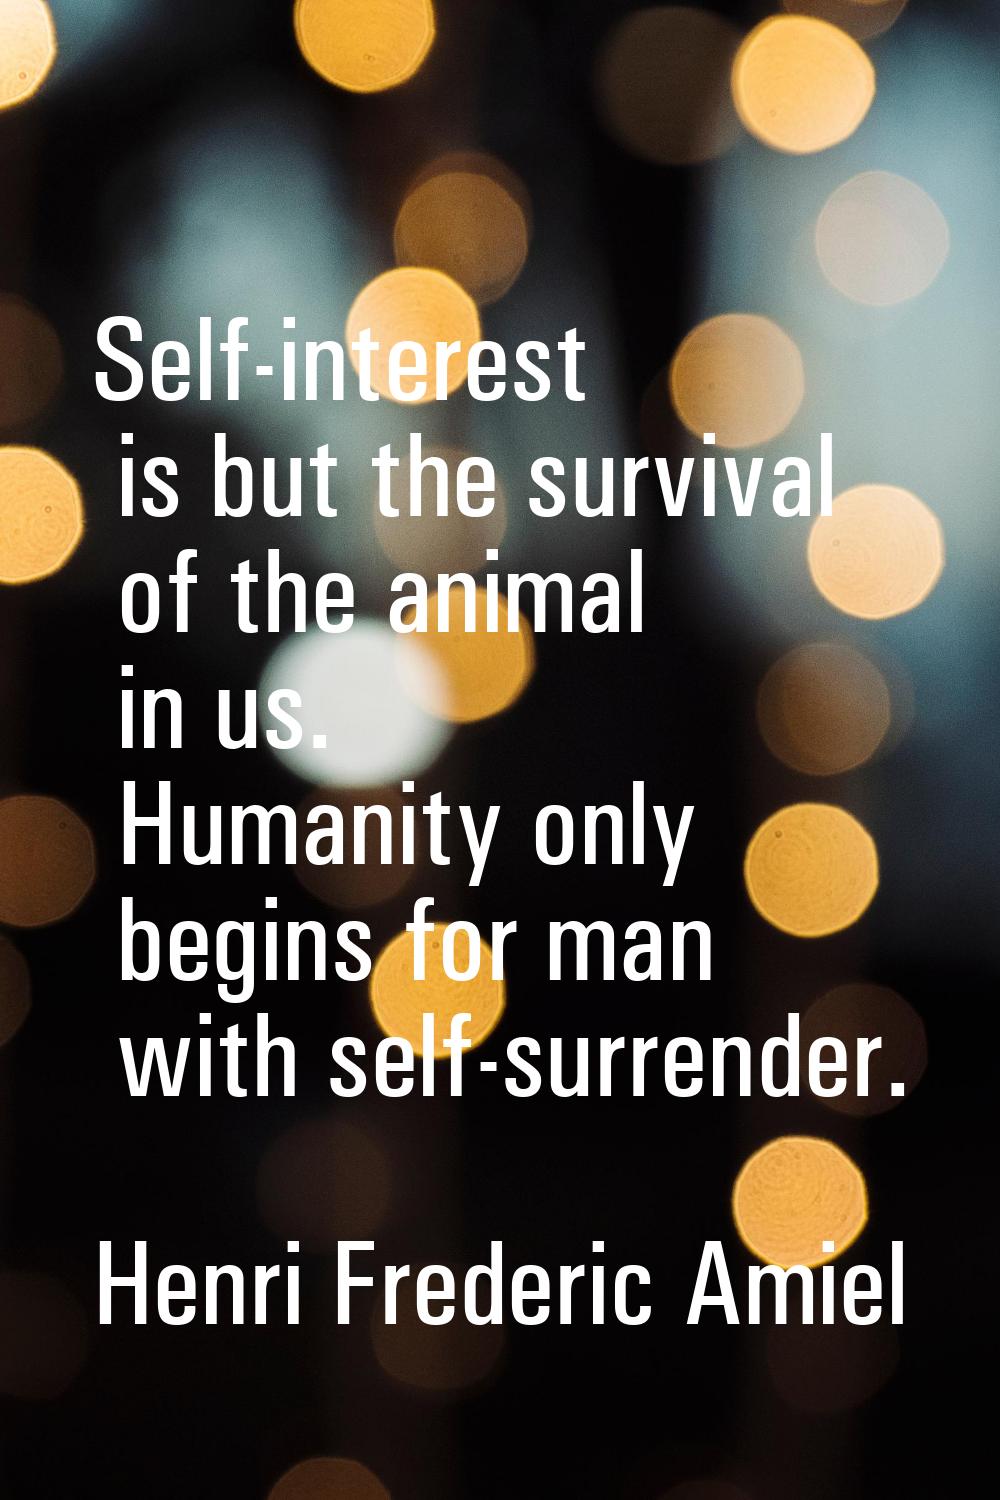 Self-interest is but the survival of the animal in us. Humanity only begins for man with self-surre